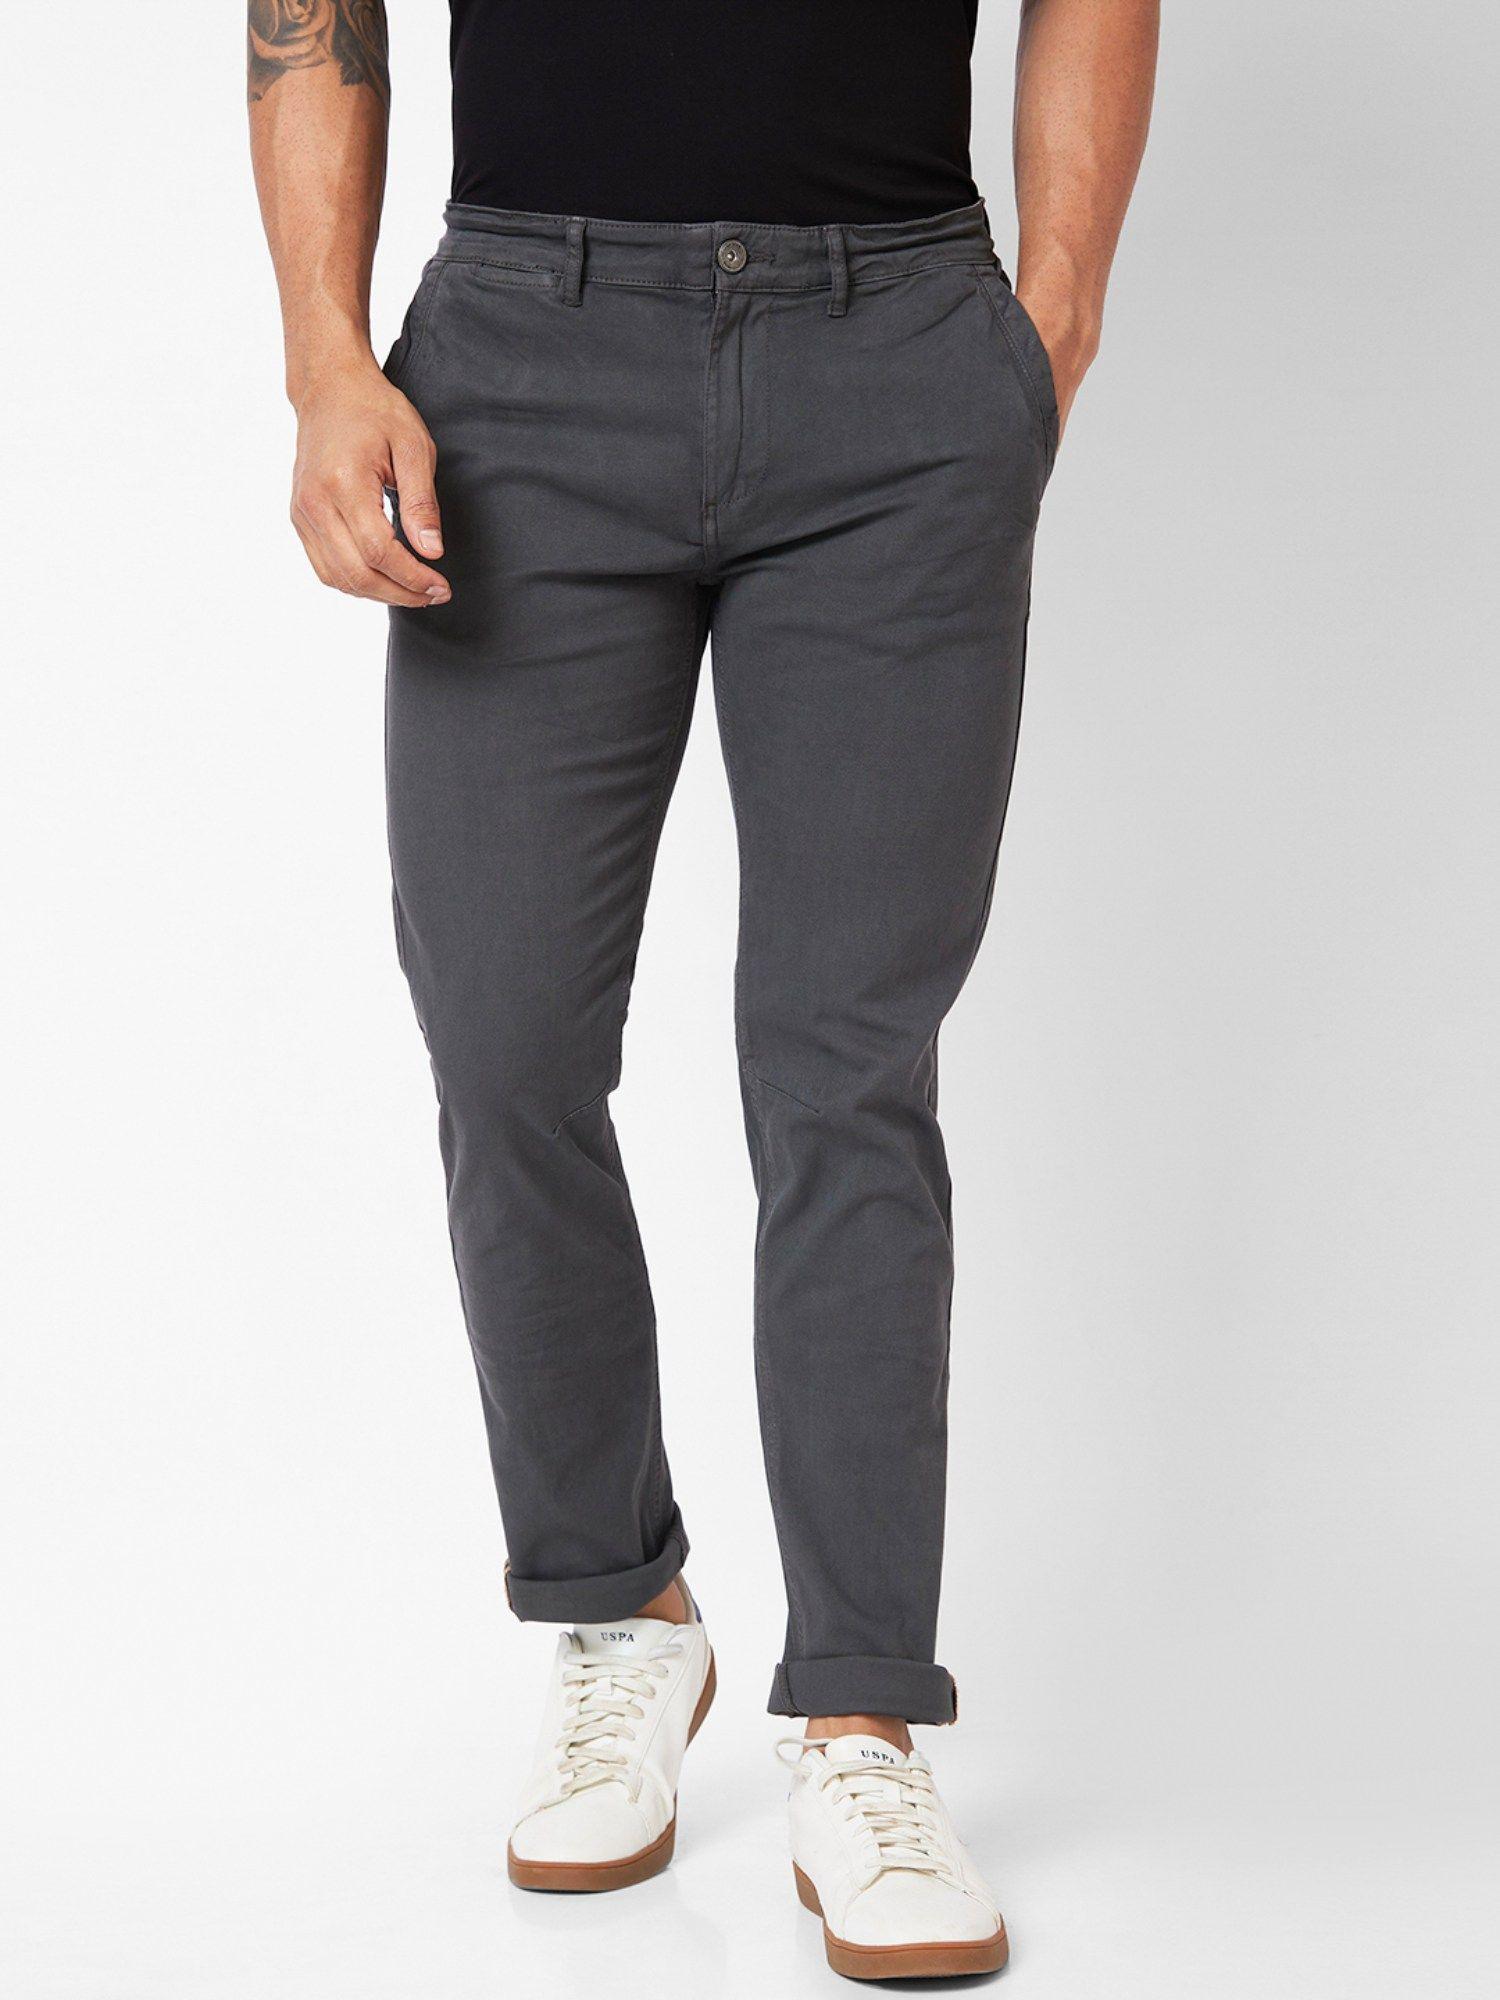 mid-rise-regular-fit-grey-trousers-for-men